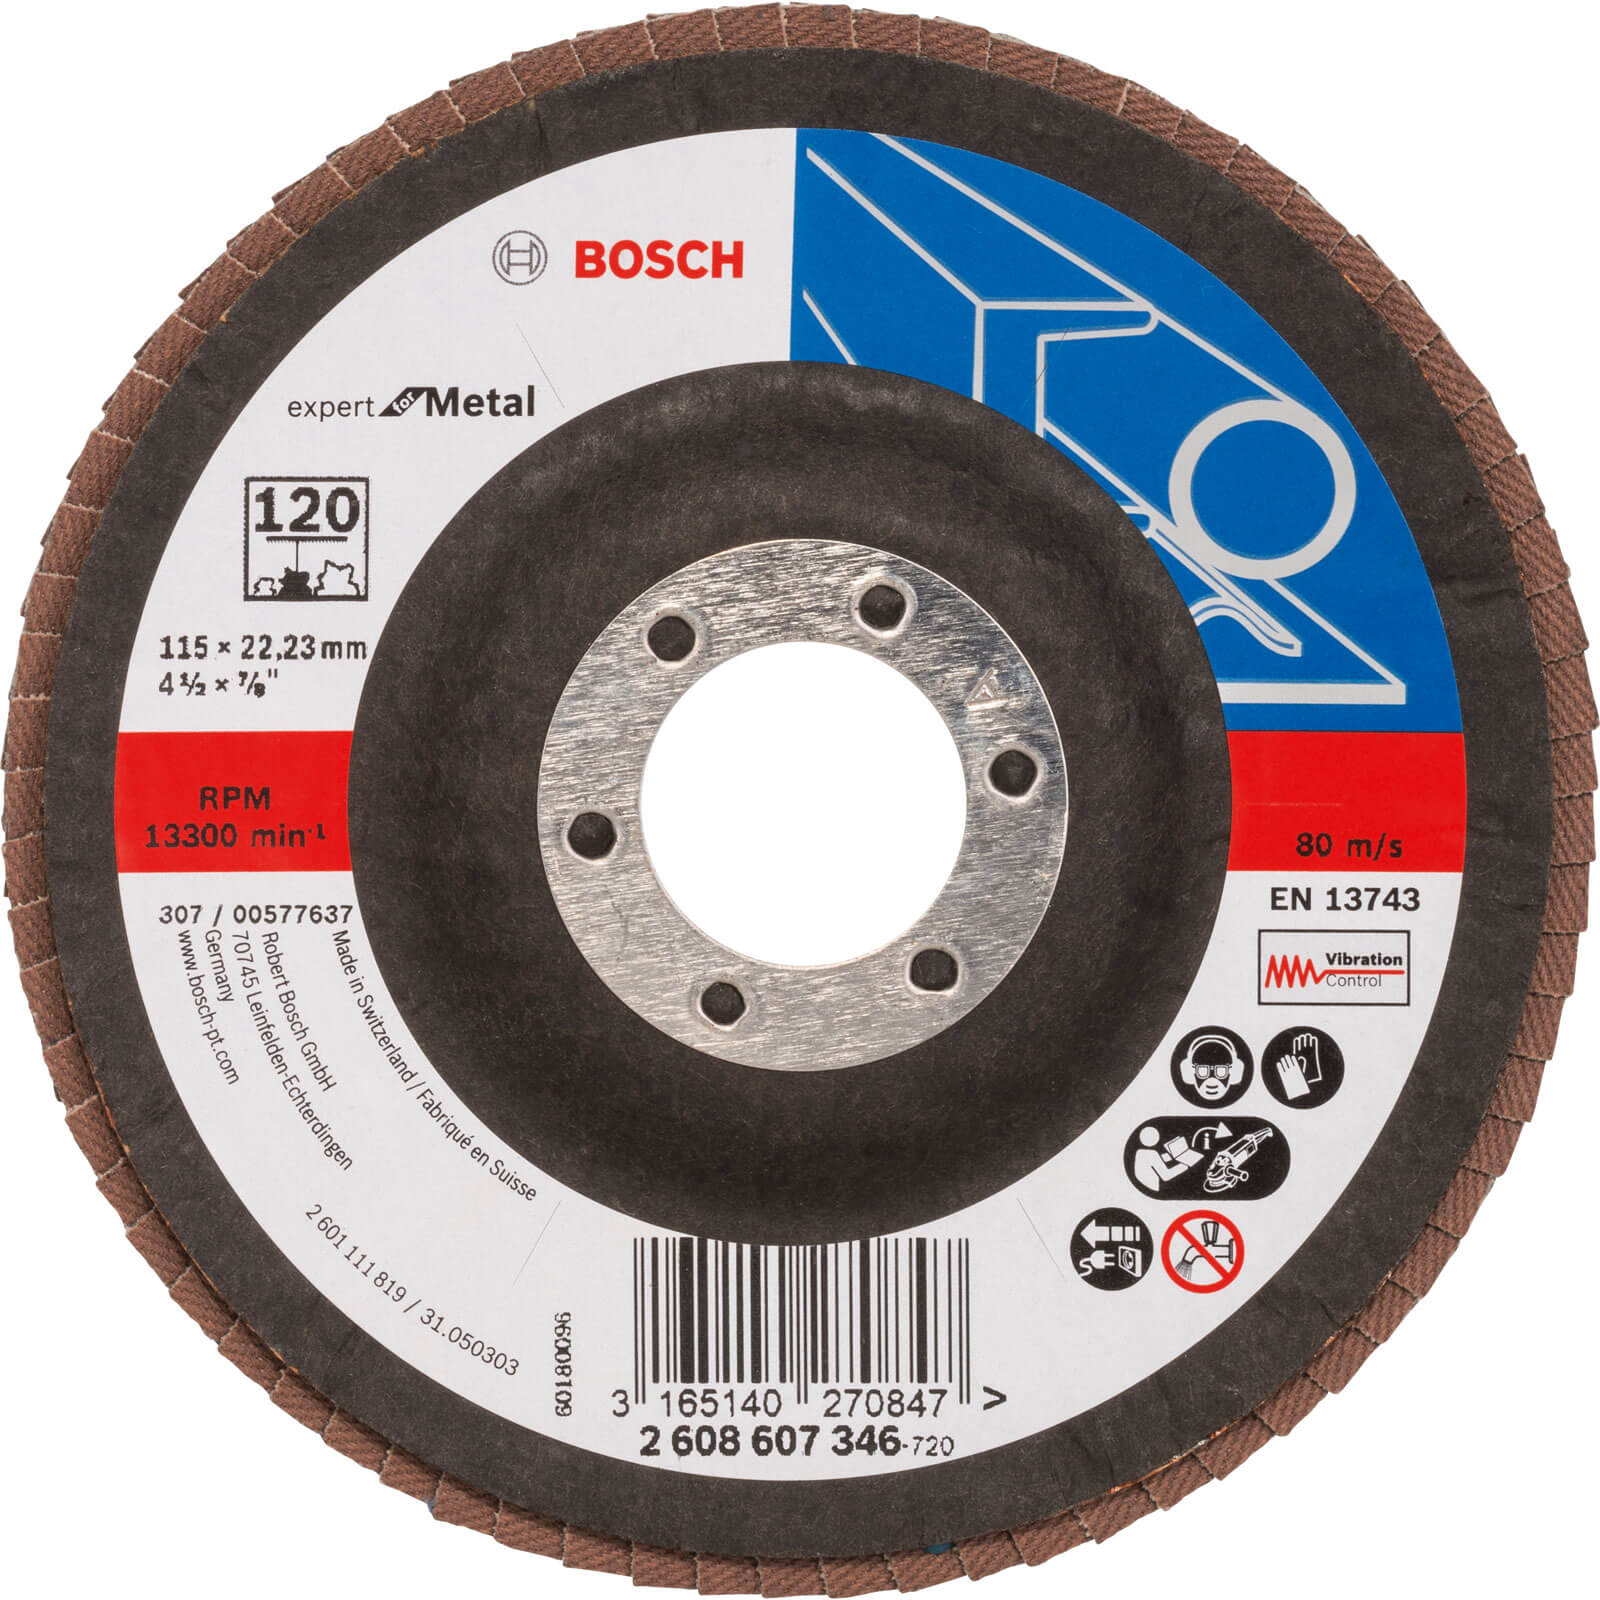 Photos - Cutting Disc Bosch Expert X551 for Metal Angled Flap Disc 115mm 120g Pack of 1 26086073 